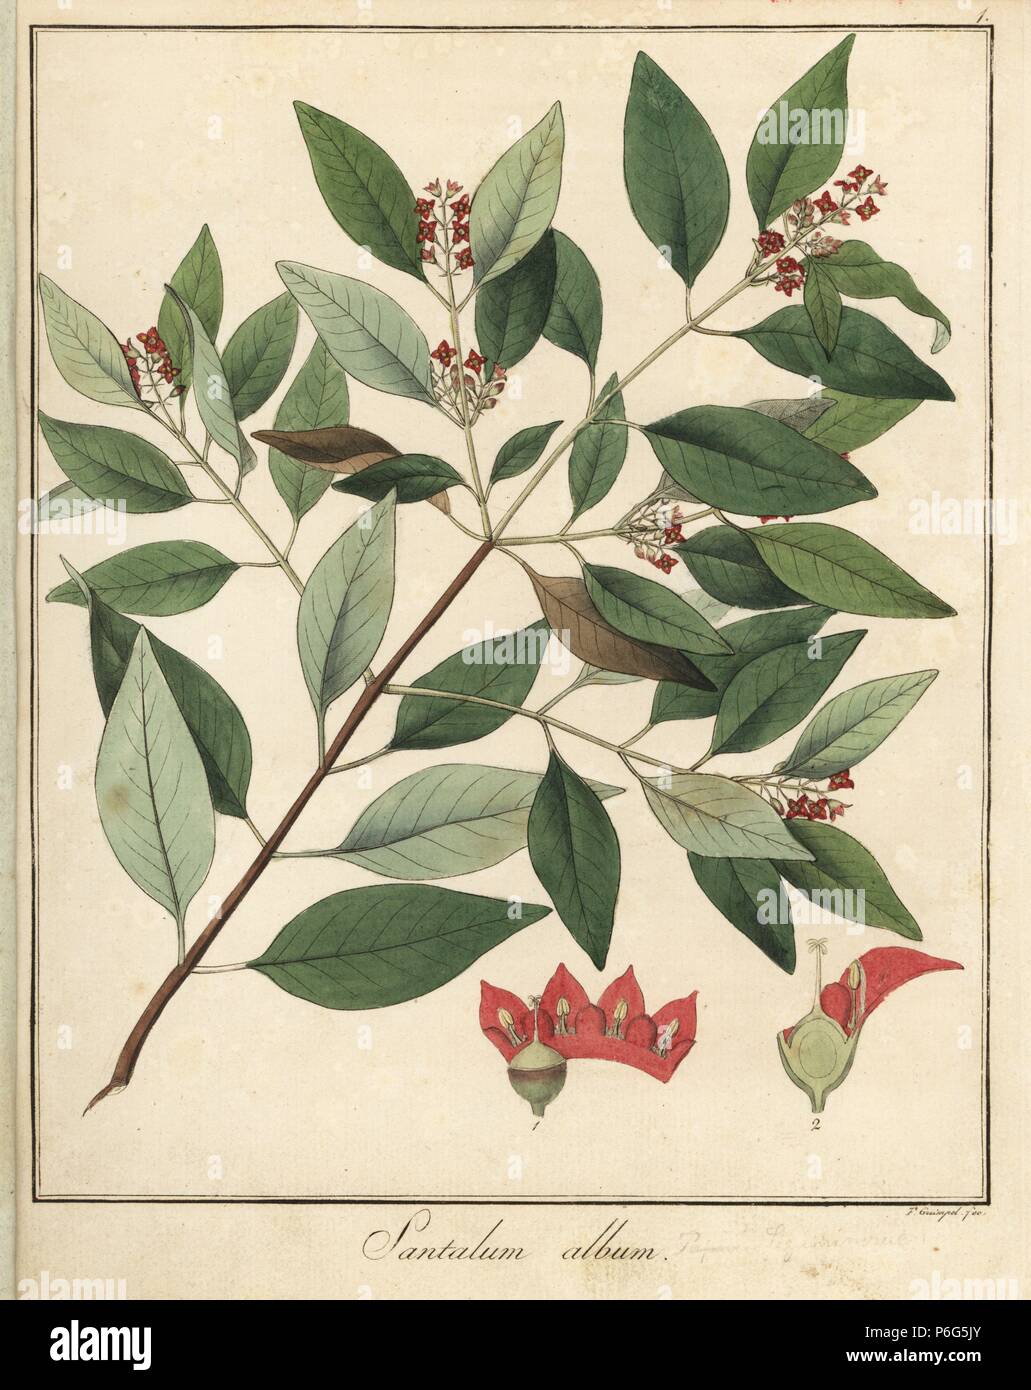 Indian sandalwood, Santalum album. Vulnerable. Handcoloured copperplate engraving by F. Guimpel from Dr. Friedrich Gottlob Hayne's Medical Botany, Berlin, 1822. Hayne (1763-1832) was a German botanist, apothecary and professor of pharmaceutical botany at Berlin University. Stock Photo